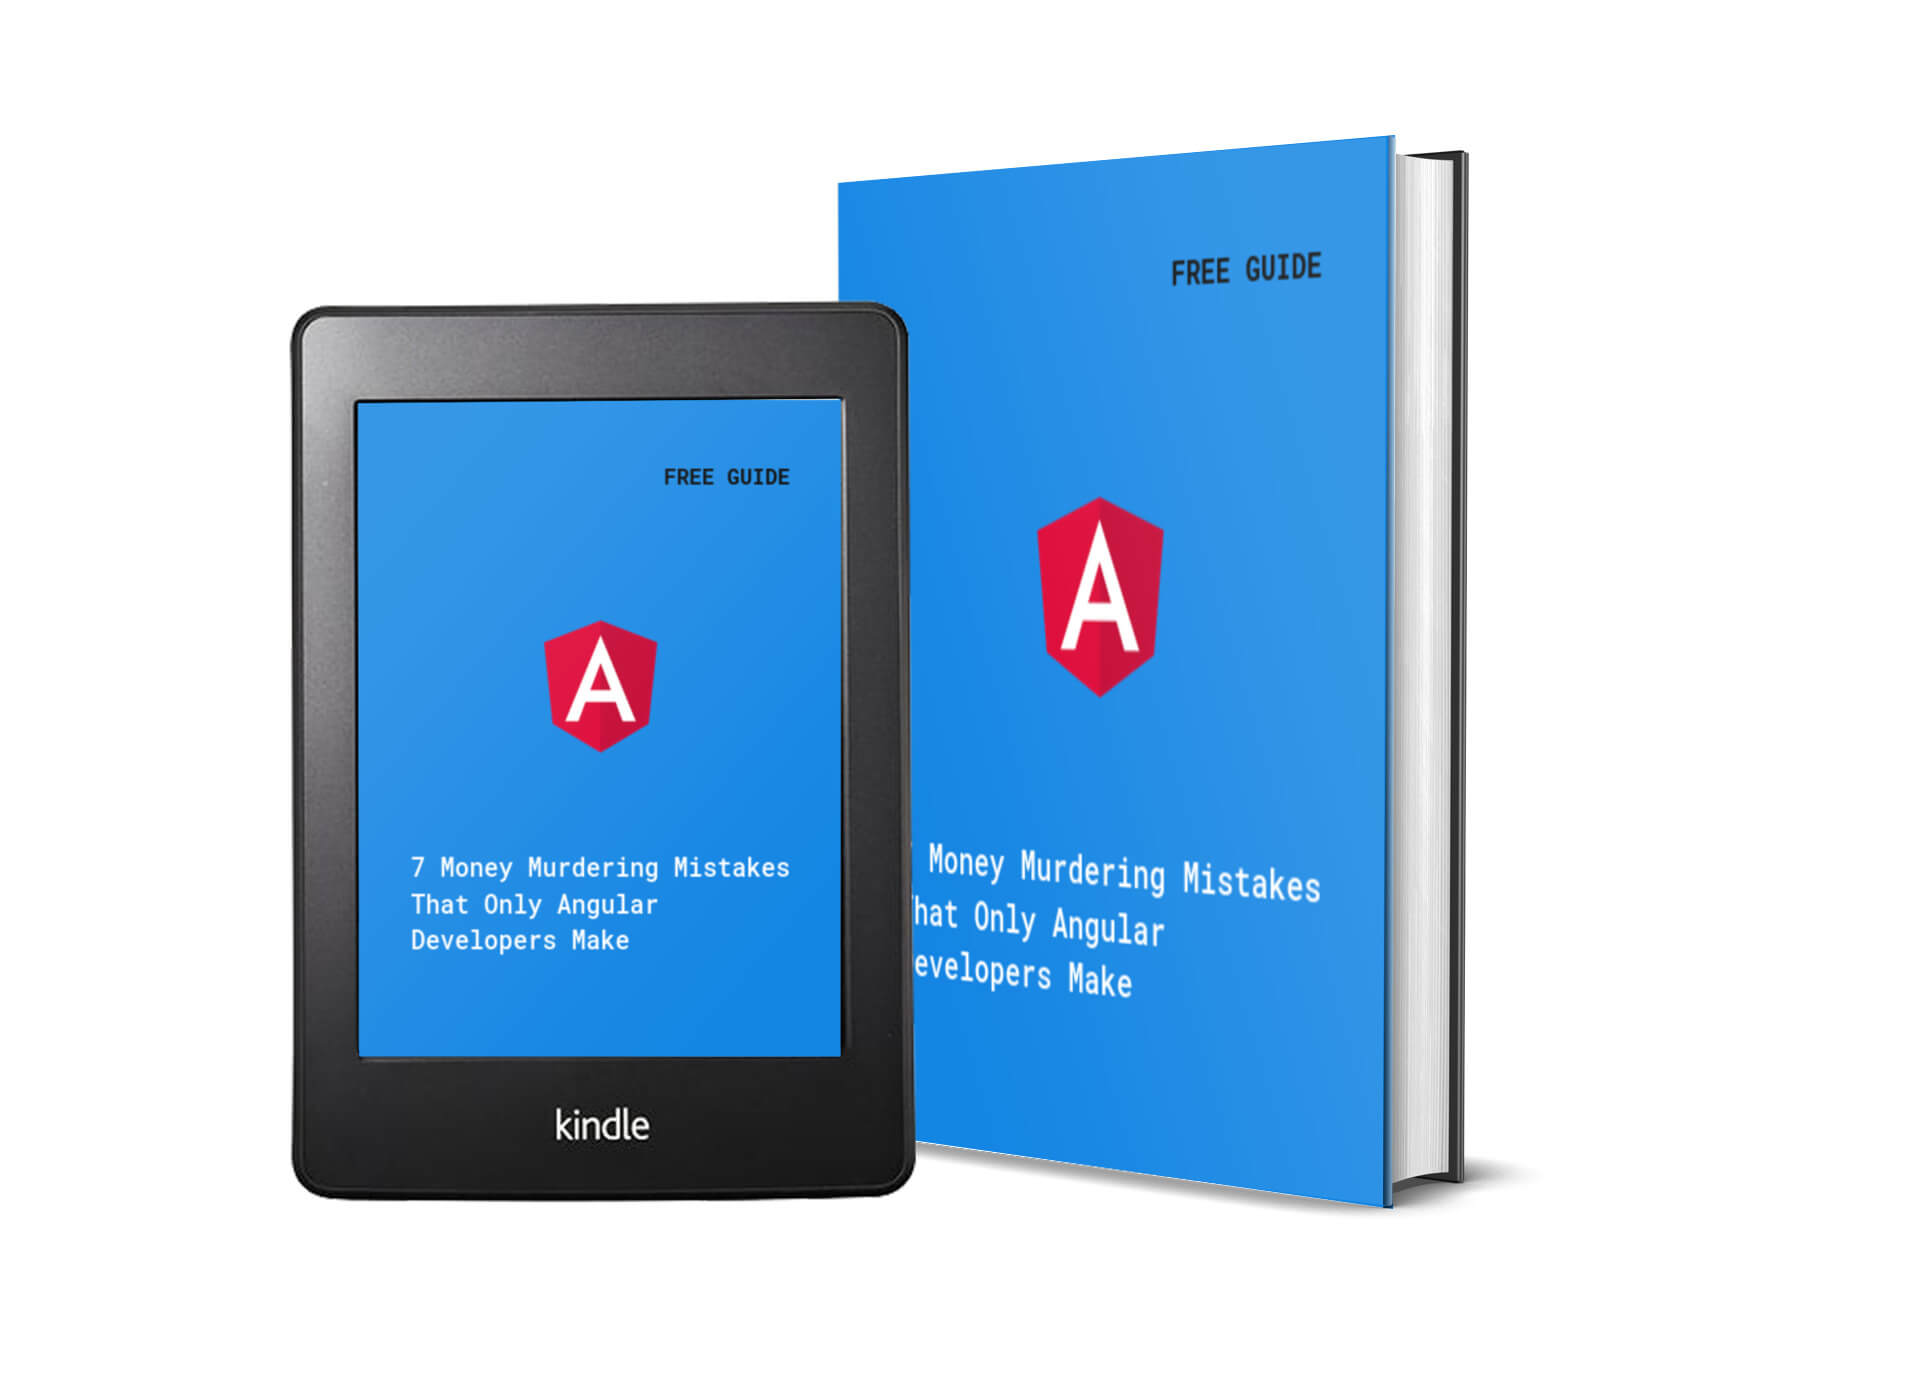 tablet%20and%20book